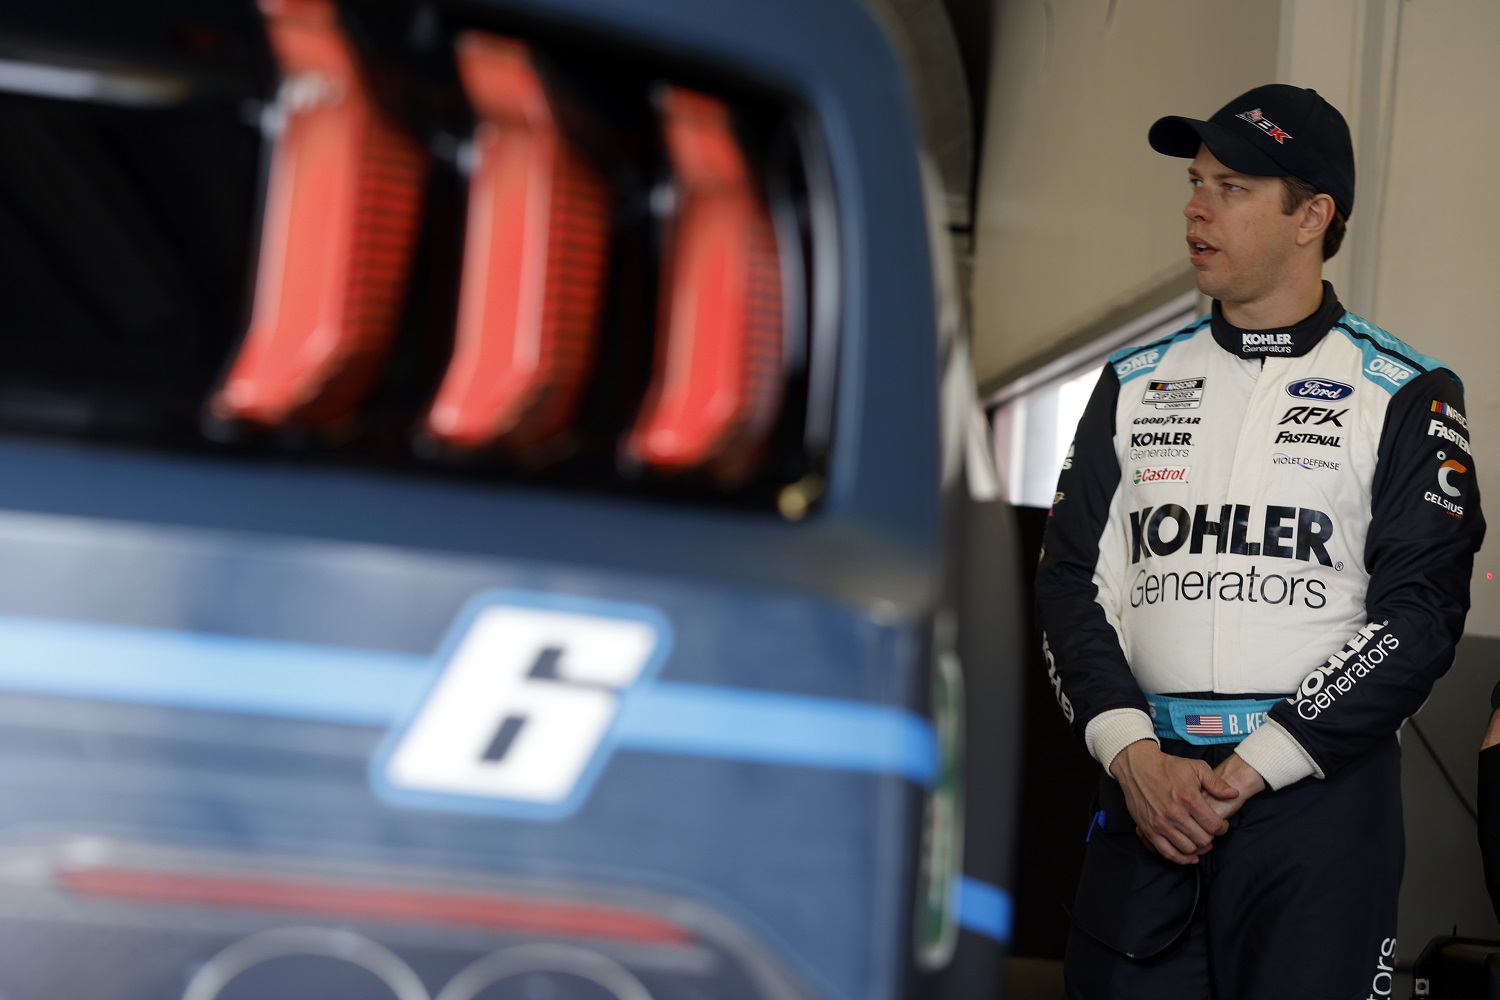 Brad Keselowski stands in the garage area during practice for the NASCAR Cup Series Daytona 500 at Daytona International Speedway on Feb. 15, 2022. | Chris Graythen/Getty Images